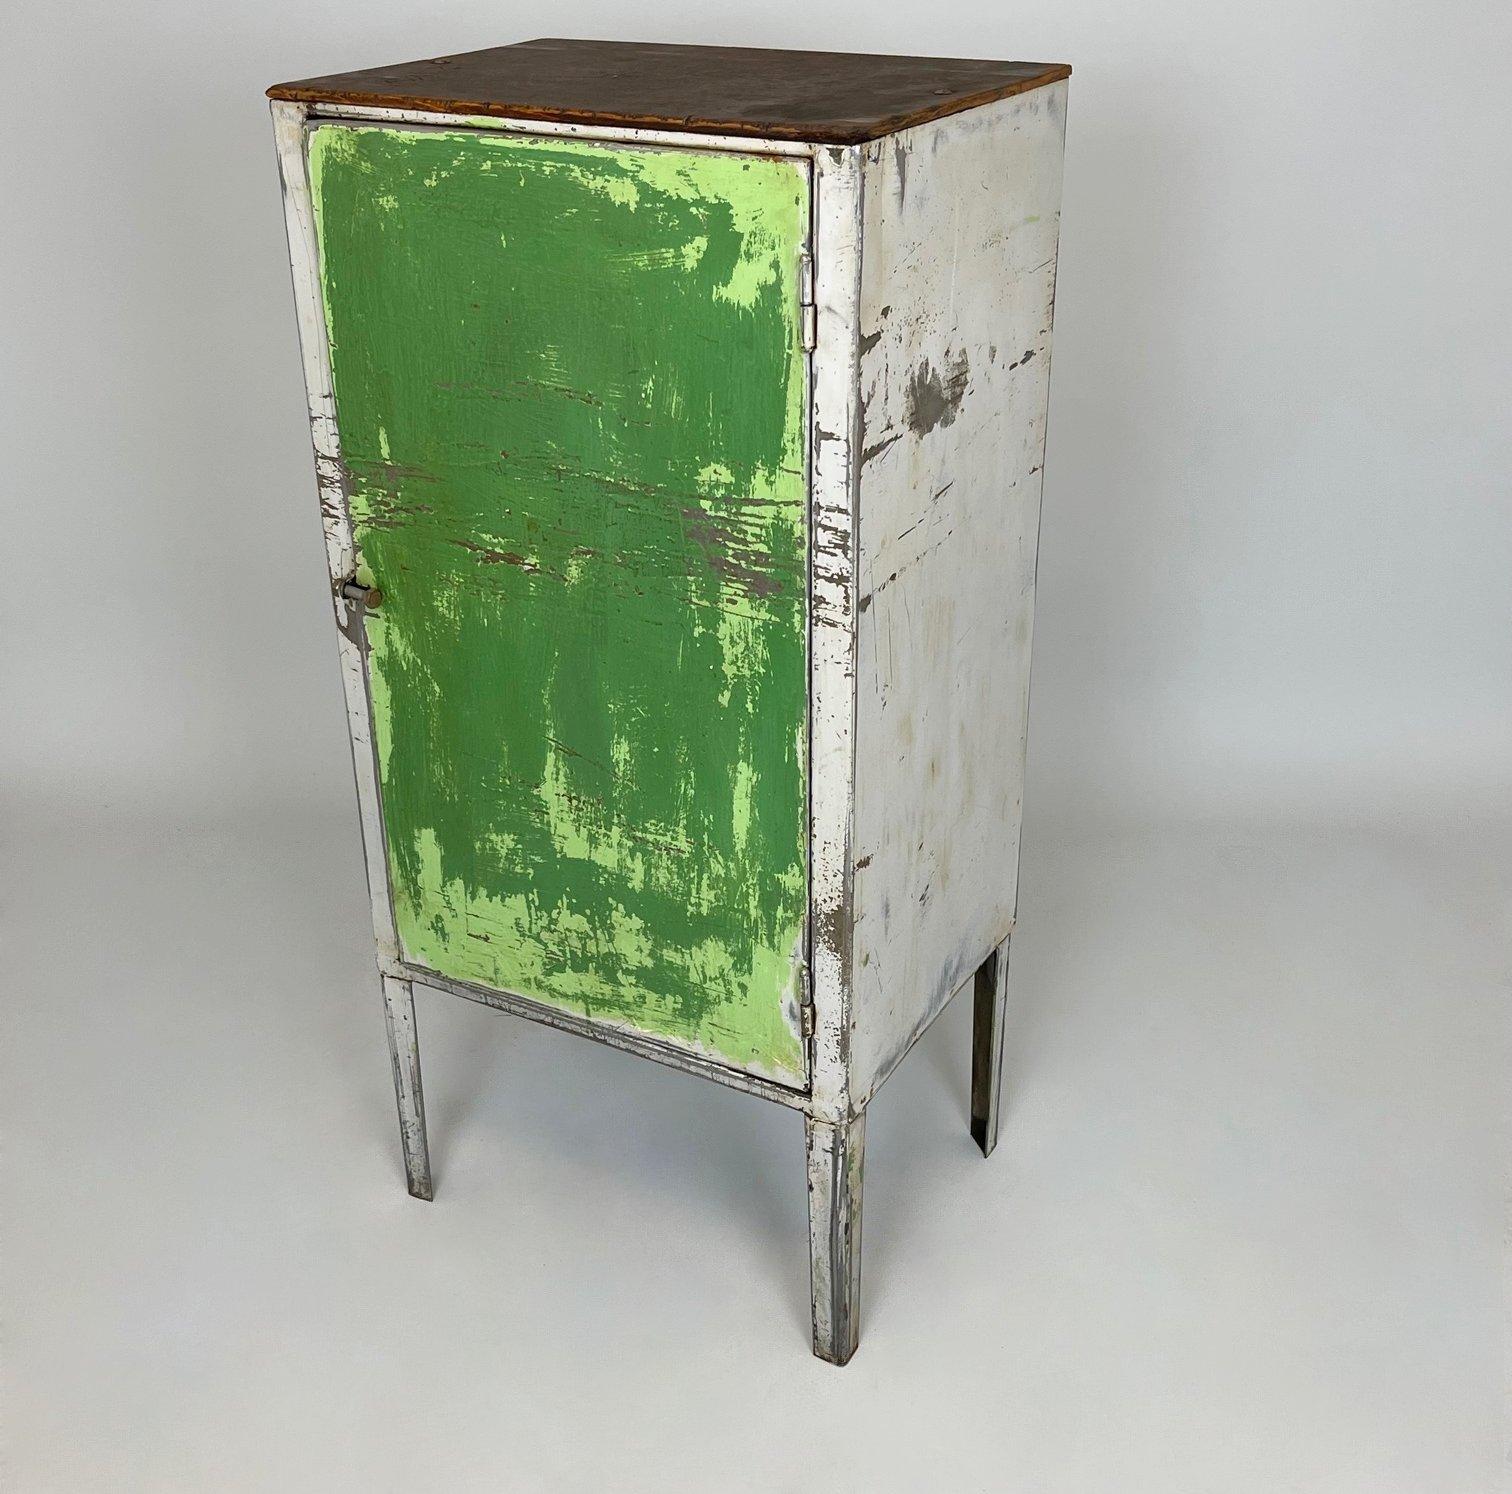 Vintage industrial metal cabinet with original paint was saved from a factory in former Czechoslovakia. The piece has been cleaned thoroughly. The wooden shelves inside are newly made form recycled wood. 
It will add uniqueness to any interior.